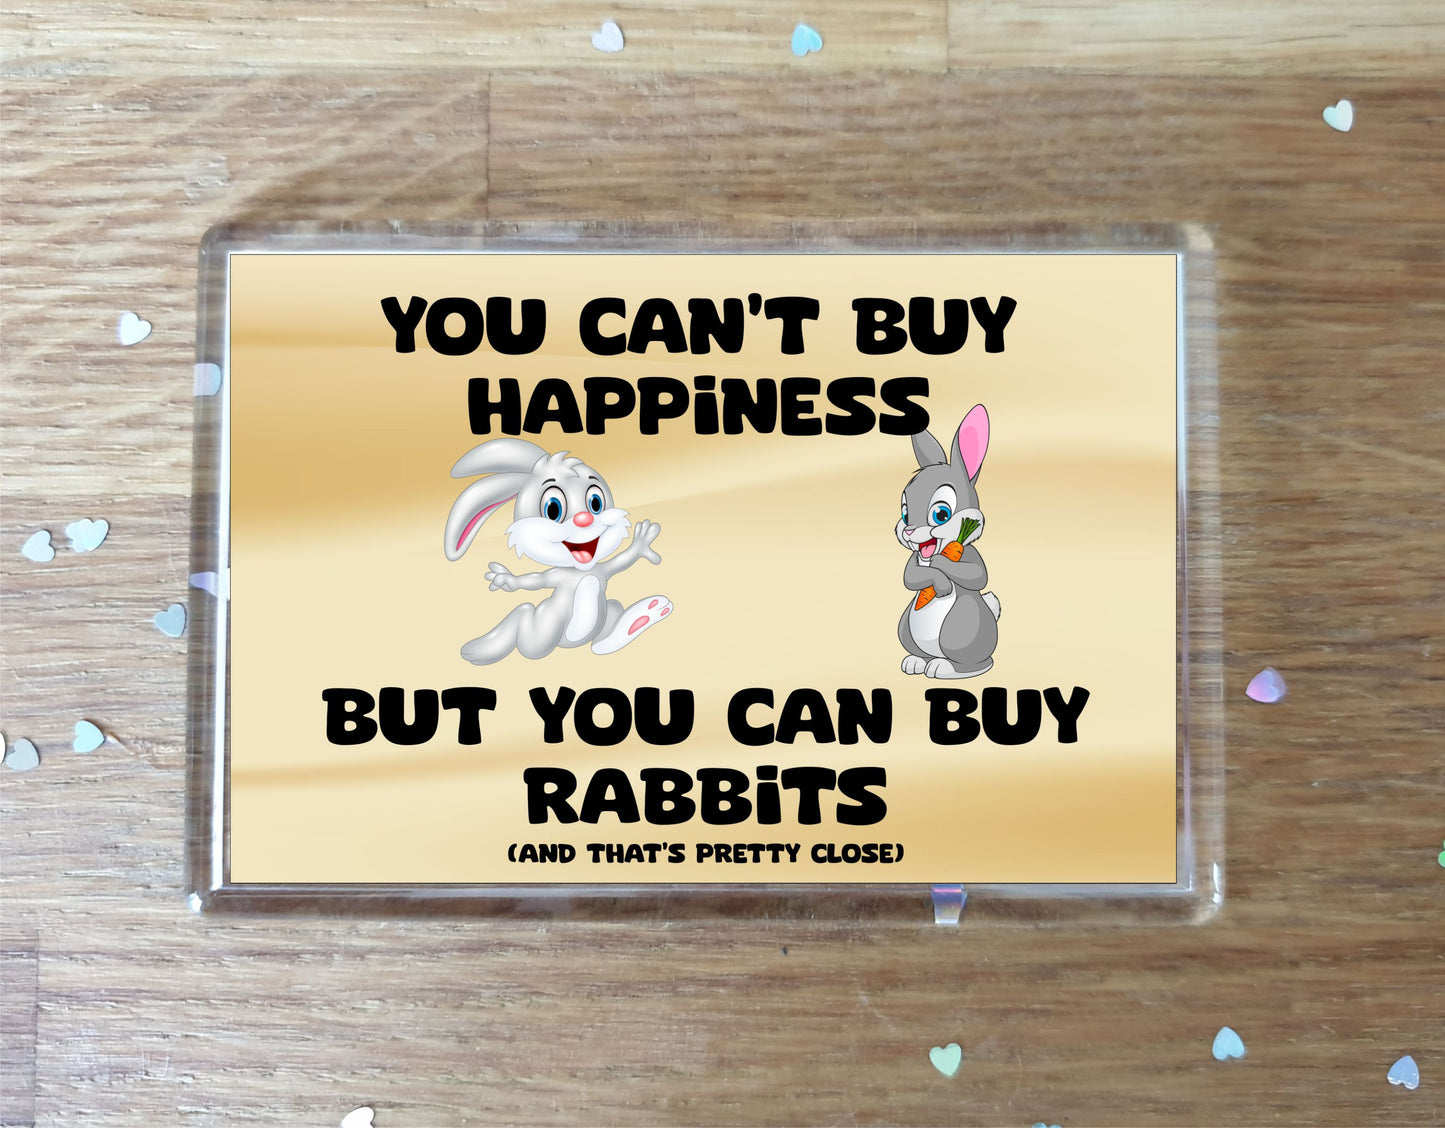 Rabbit Fridge Magnet Gift – You Can't Buy Happiness But You Can Buy * - Novelty Cute Animal Present